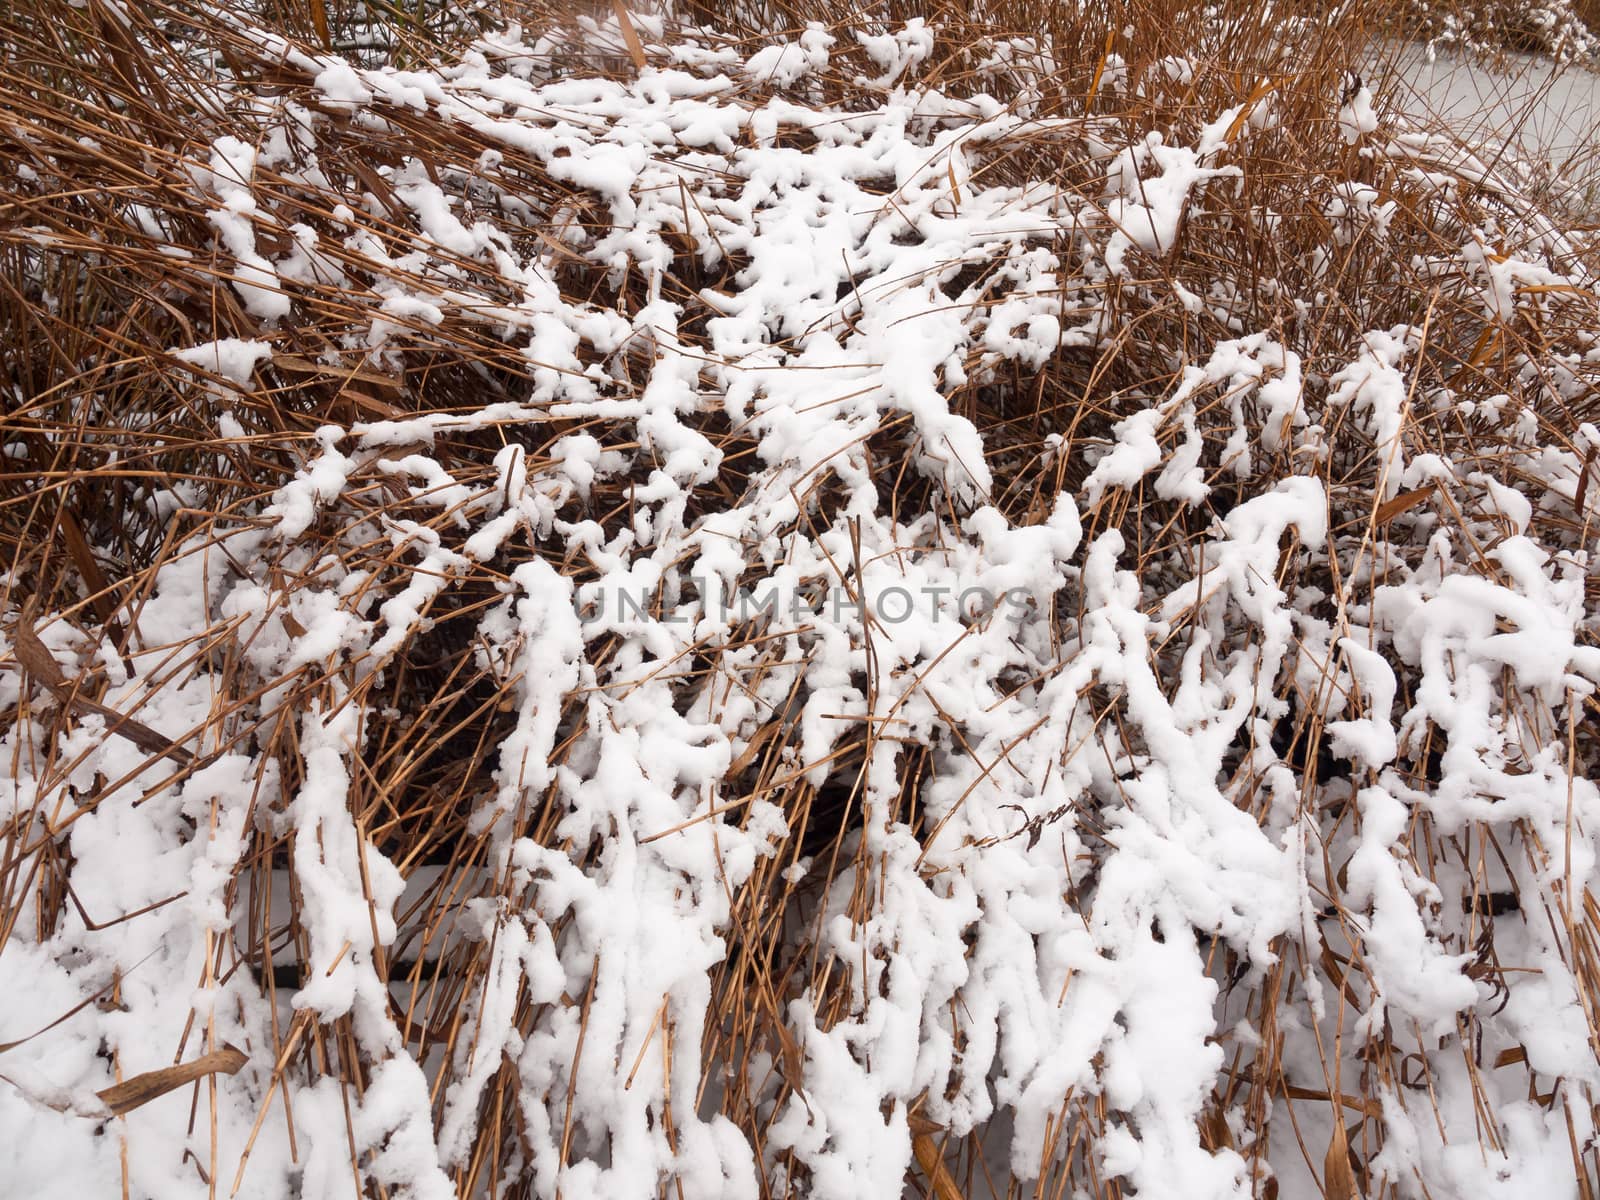 outside lake reeds covered in snow winter december background by callumrc